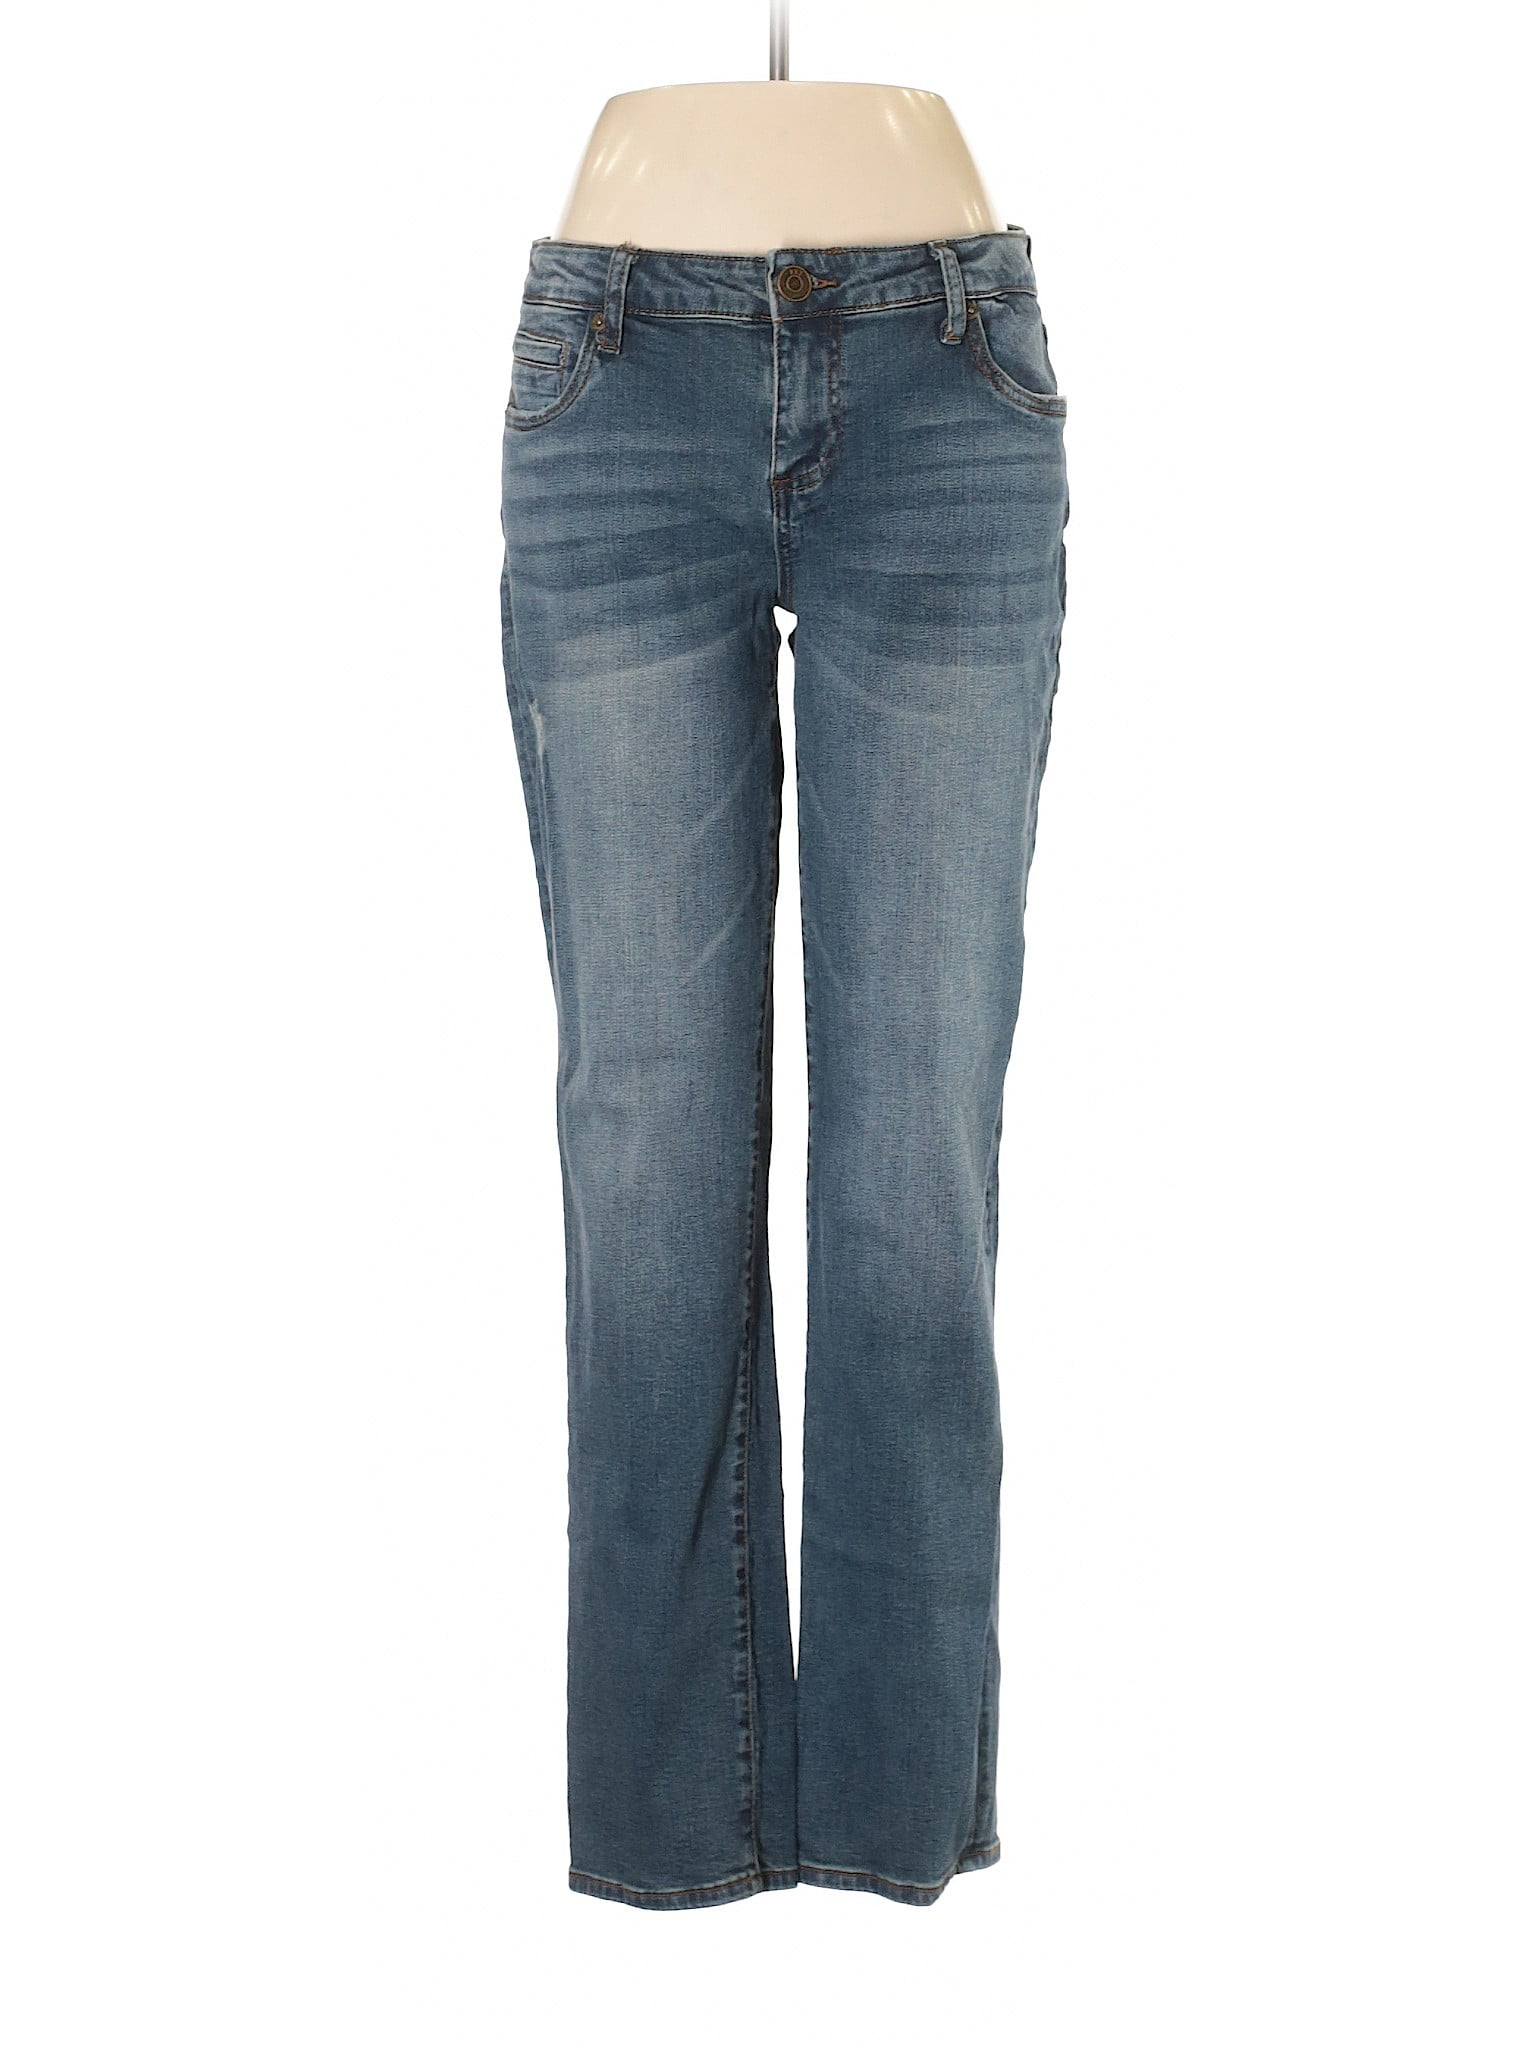 KUT from the Kloth - Pre-Owned Kut from the Kloth Women's Size 8 Jeans ...